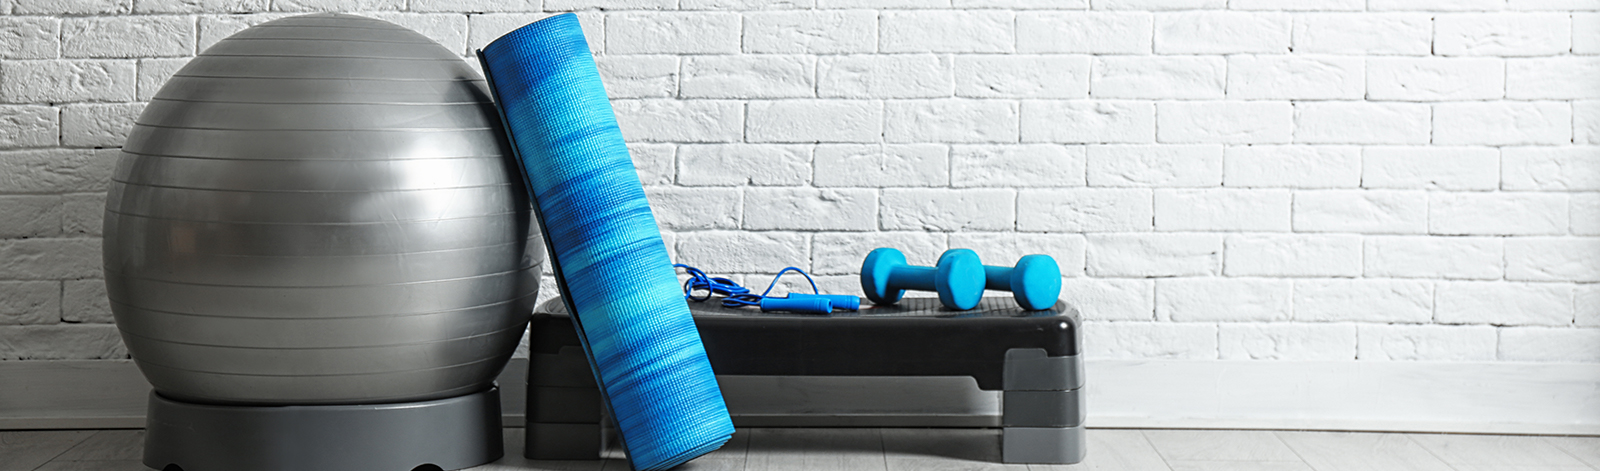 Set of fitness equipment on the floor near a white brick wall